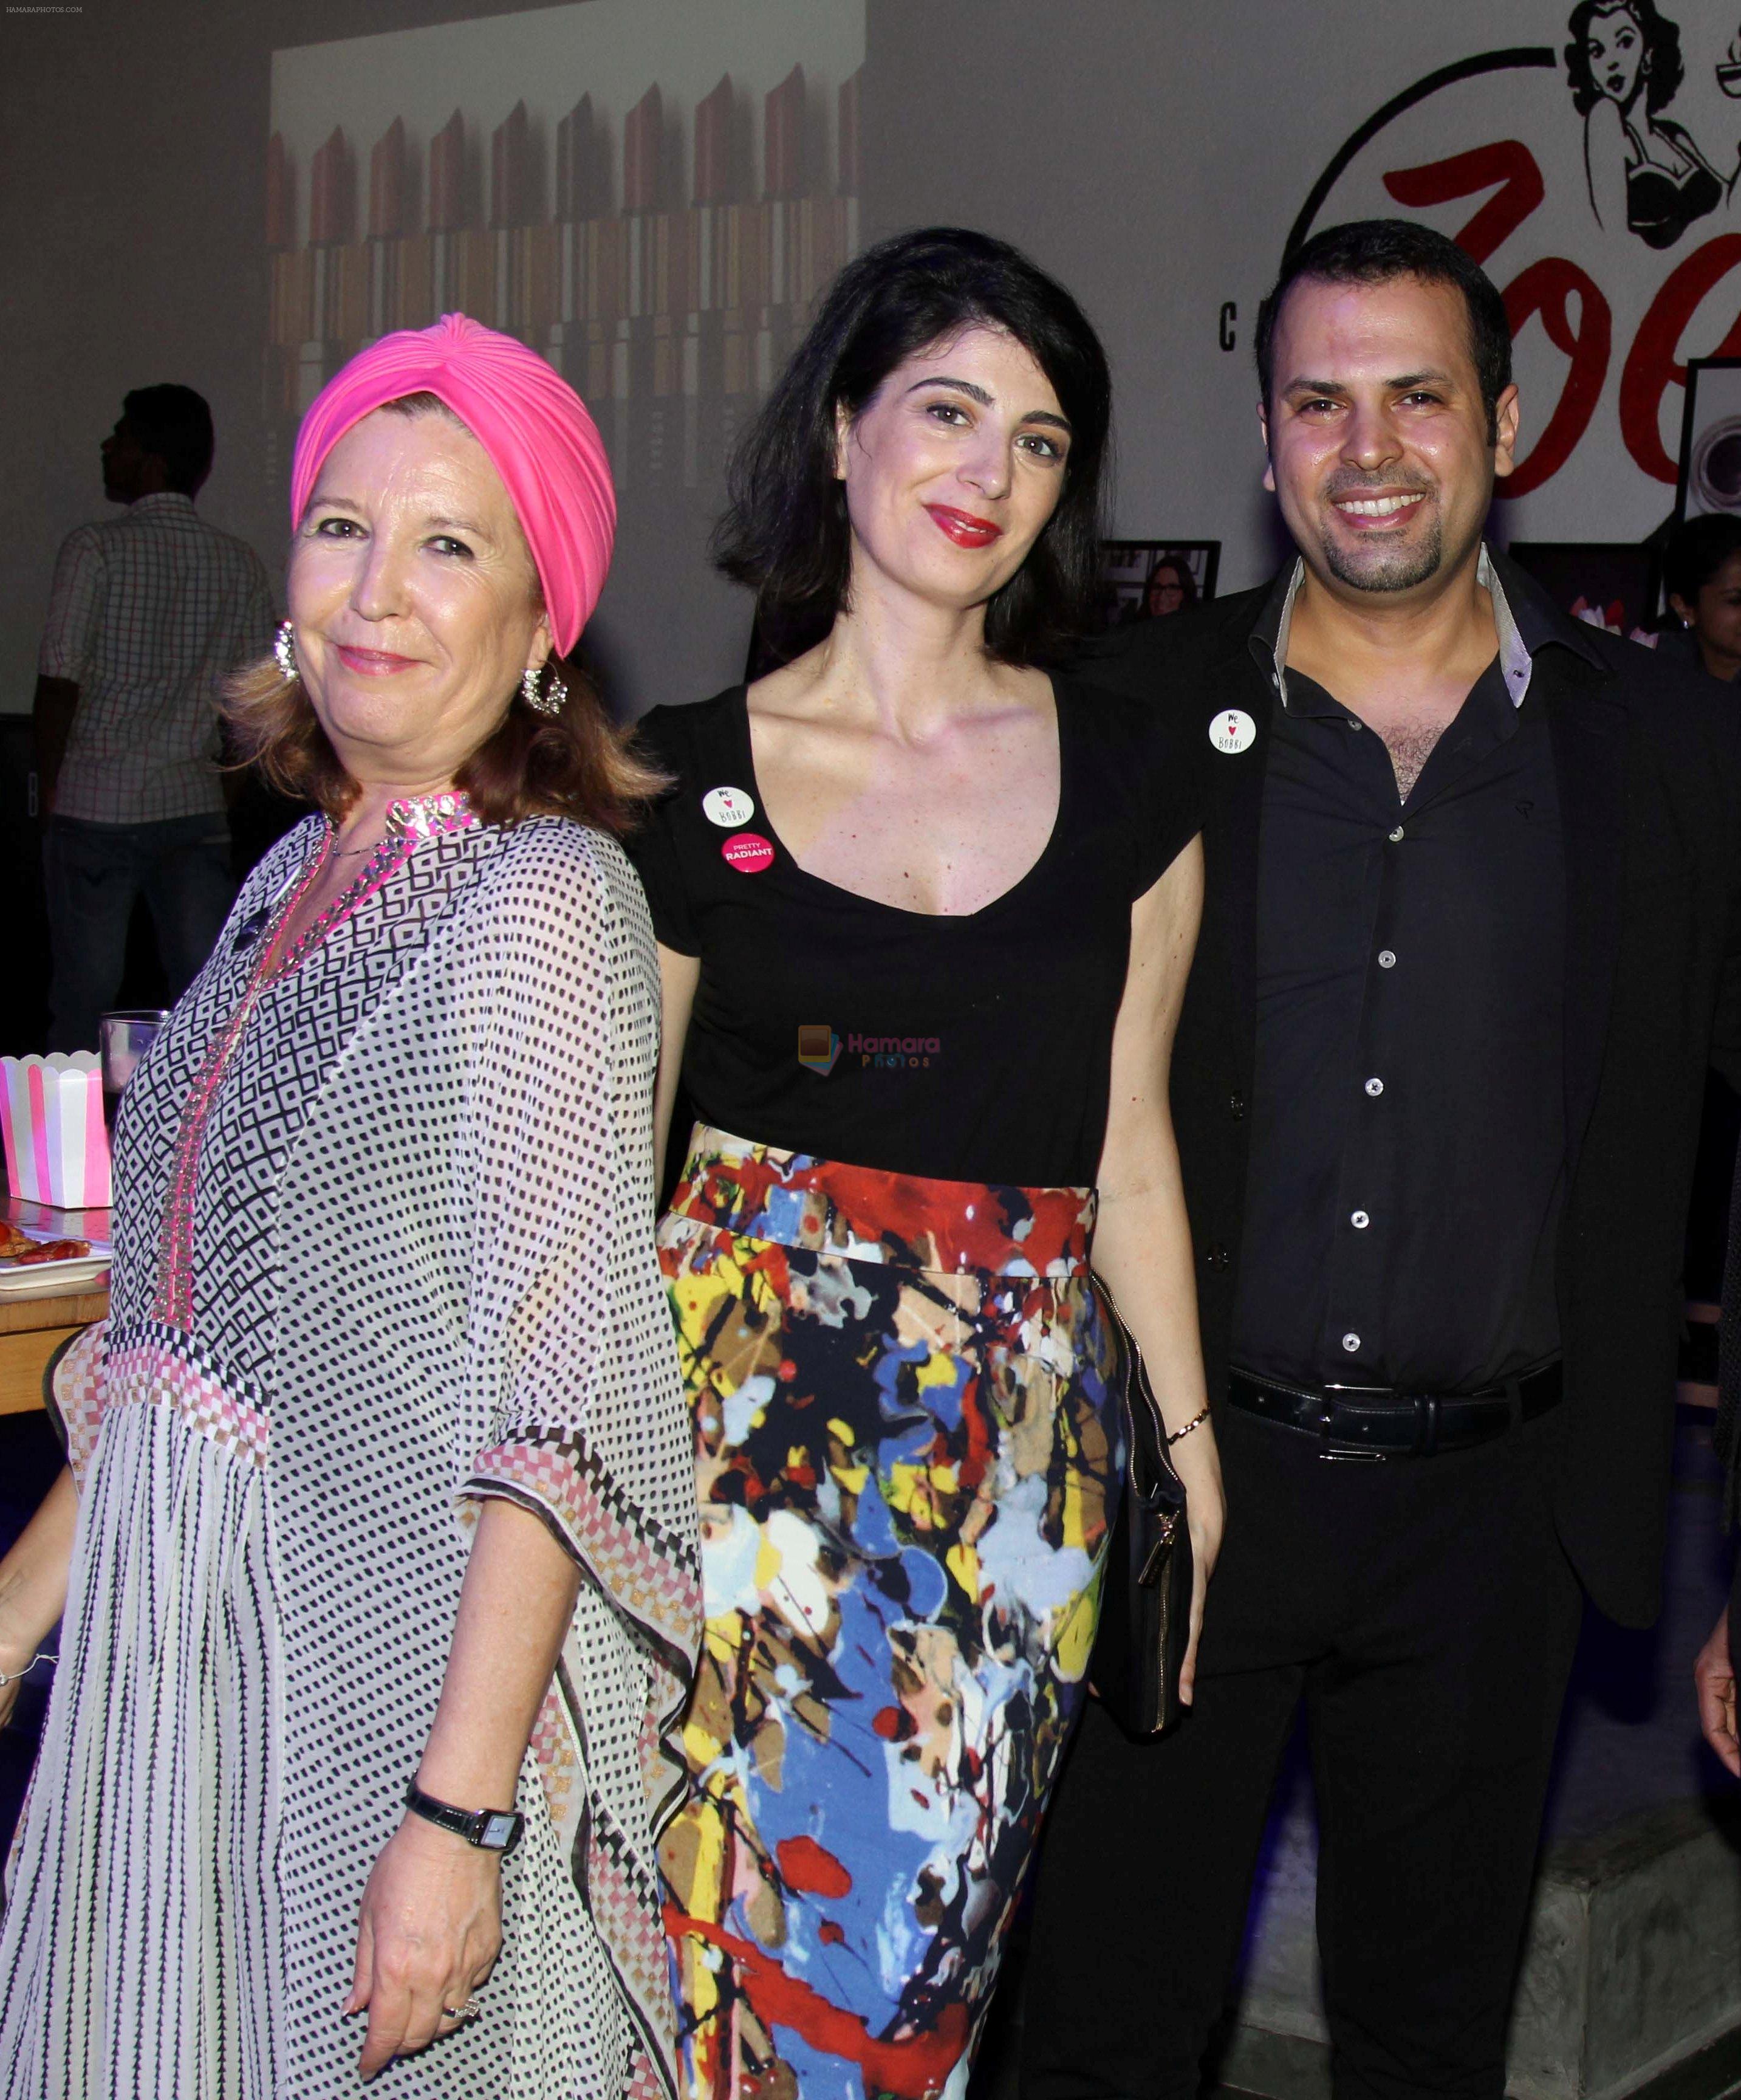 Marta Prieto, VP & GM Bobbi Brown Cosmetics - India, Africa, Middle East and Europe and Eliano Bou Assi, Regional Artistry Director, Europe, Middle East, Africa & India at the Bobbi Brown Mumbai Launch Party